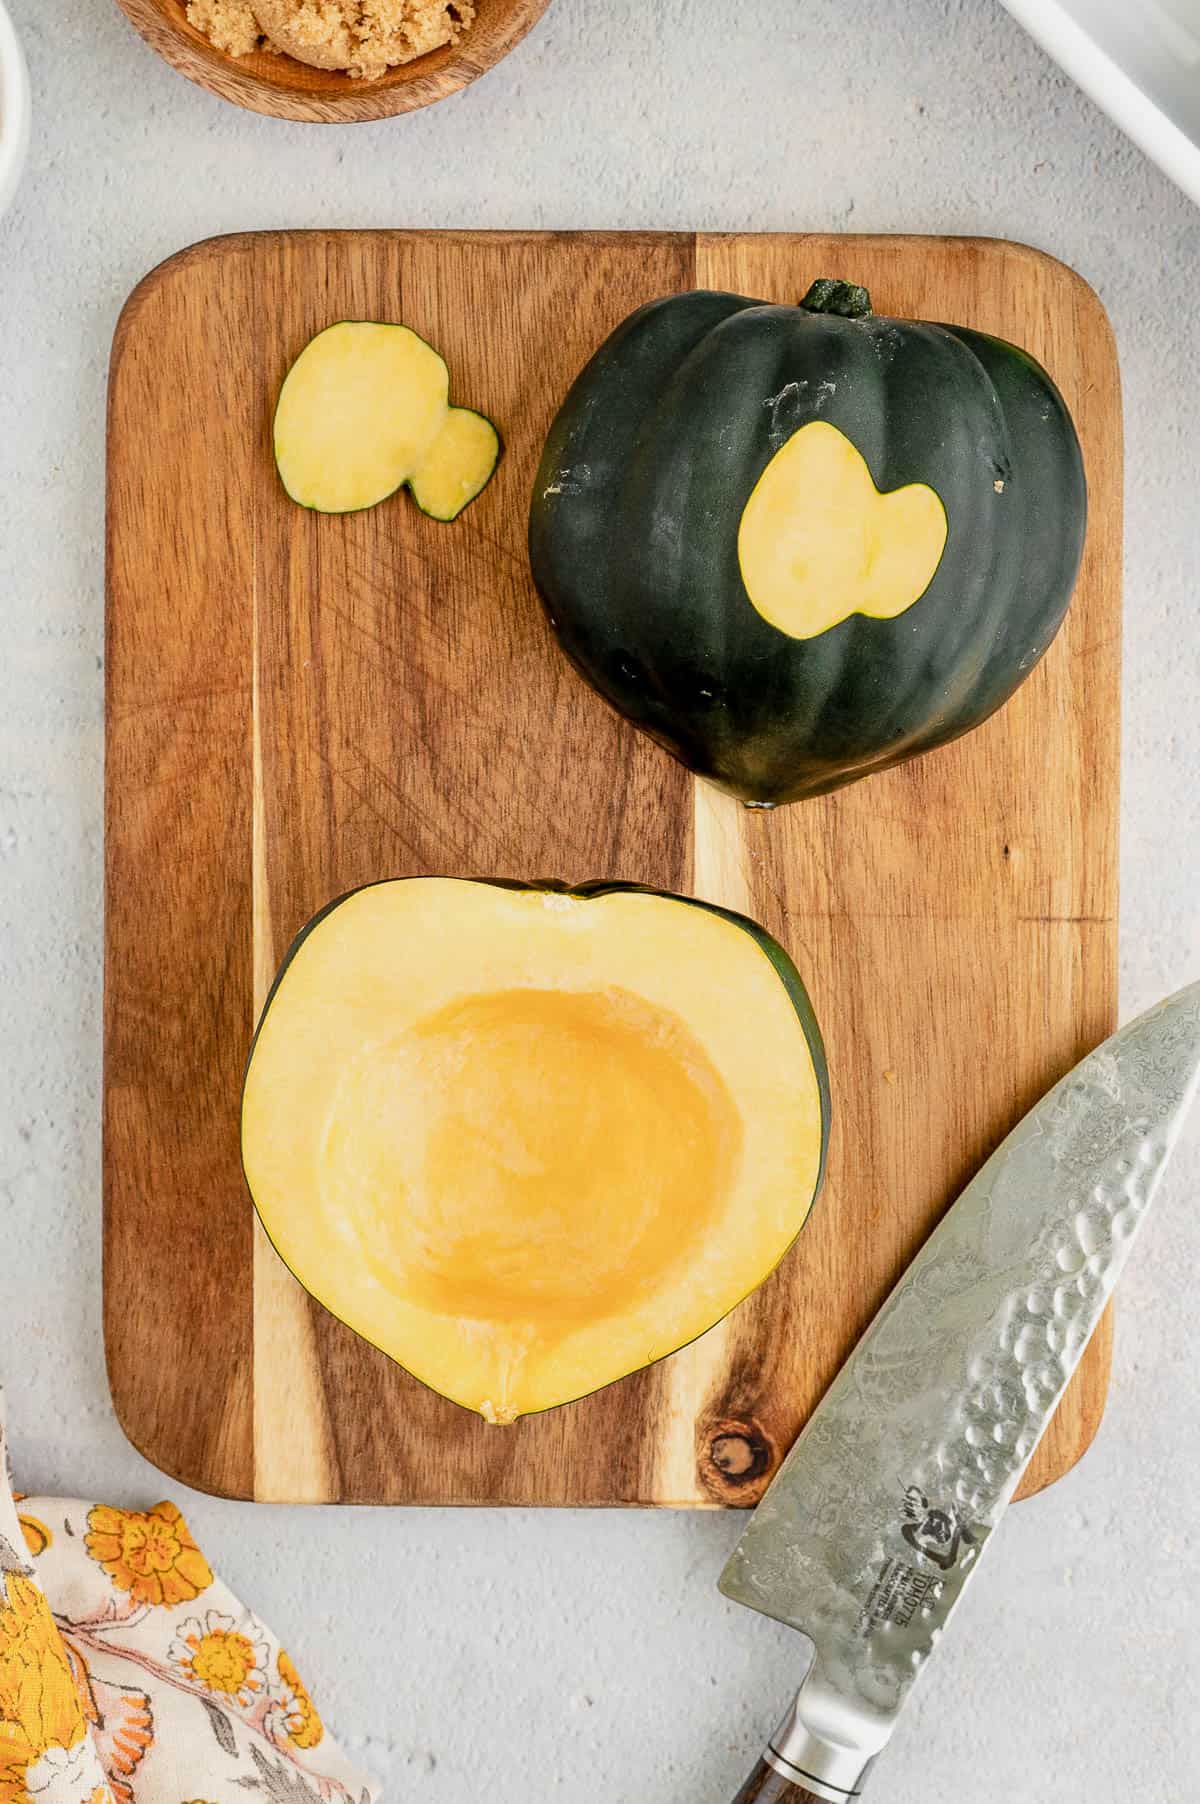 Acorn squash cut in half and seeded on a wooden cutting board, next to a knife.